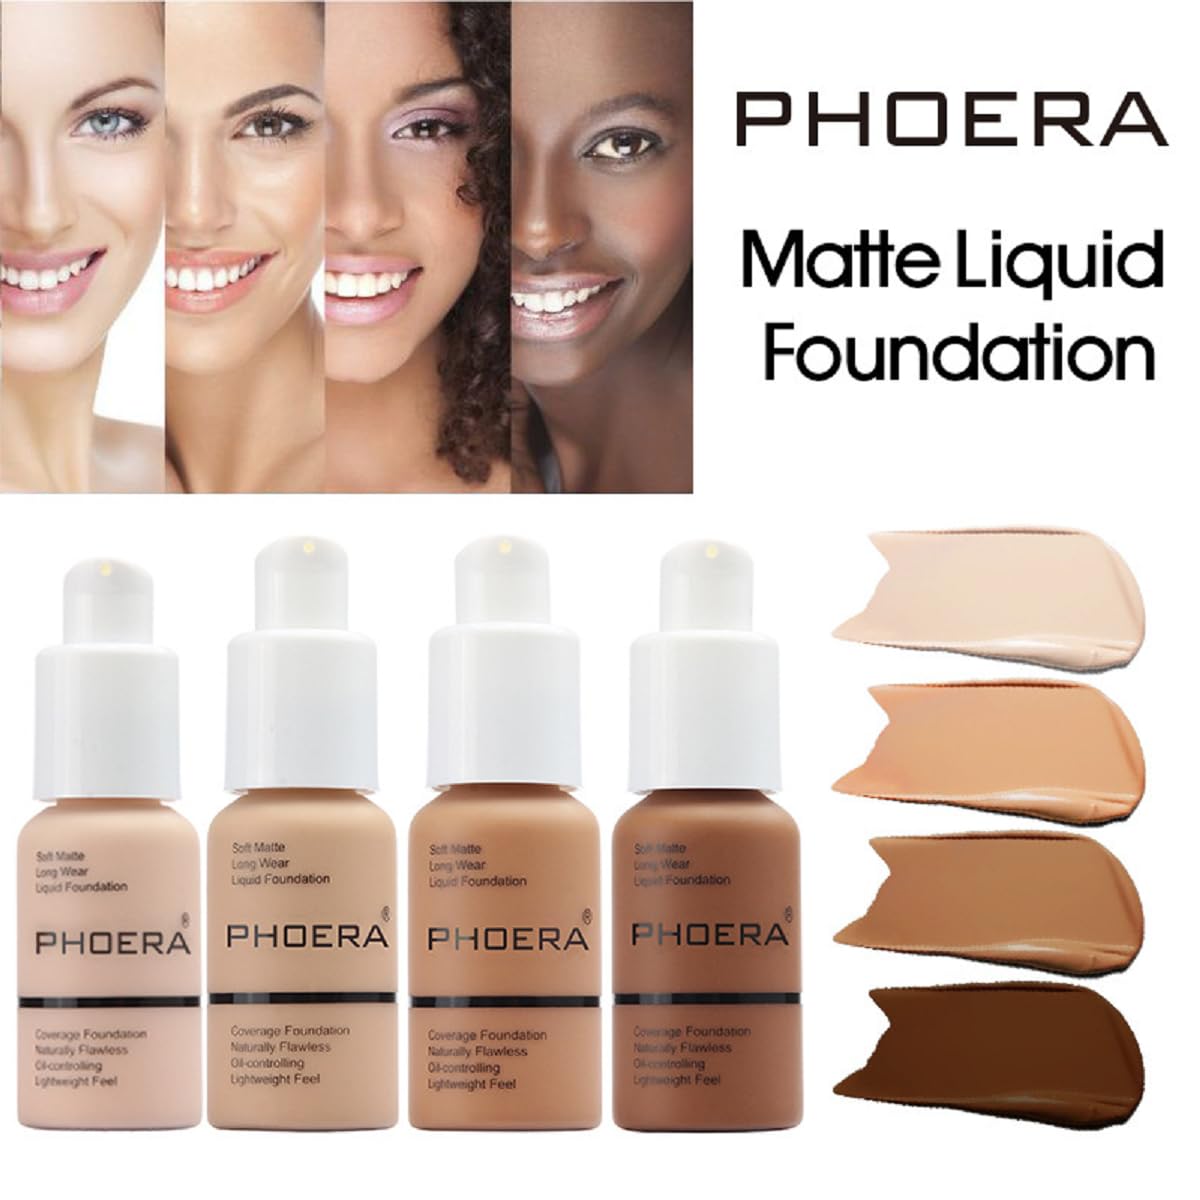 2 Pack PHOERA Foundation,Flawless Matte Liquid Foundation Makeup for Women。102 Nude-30m